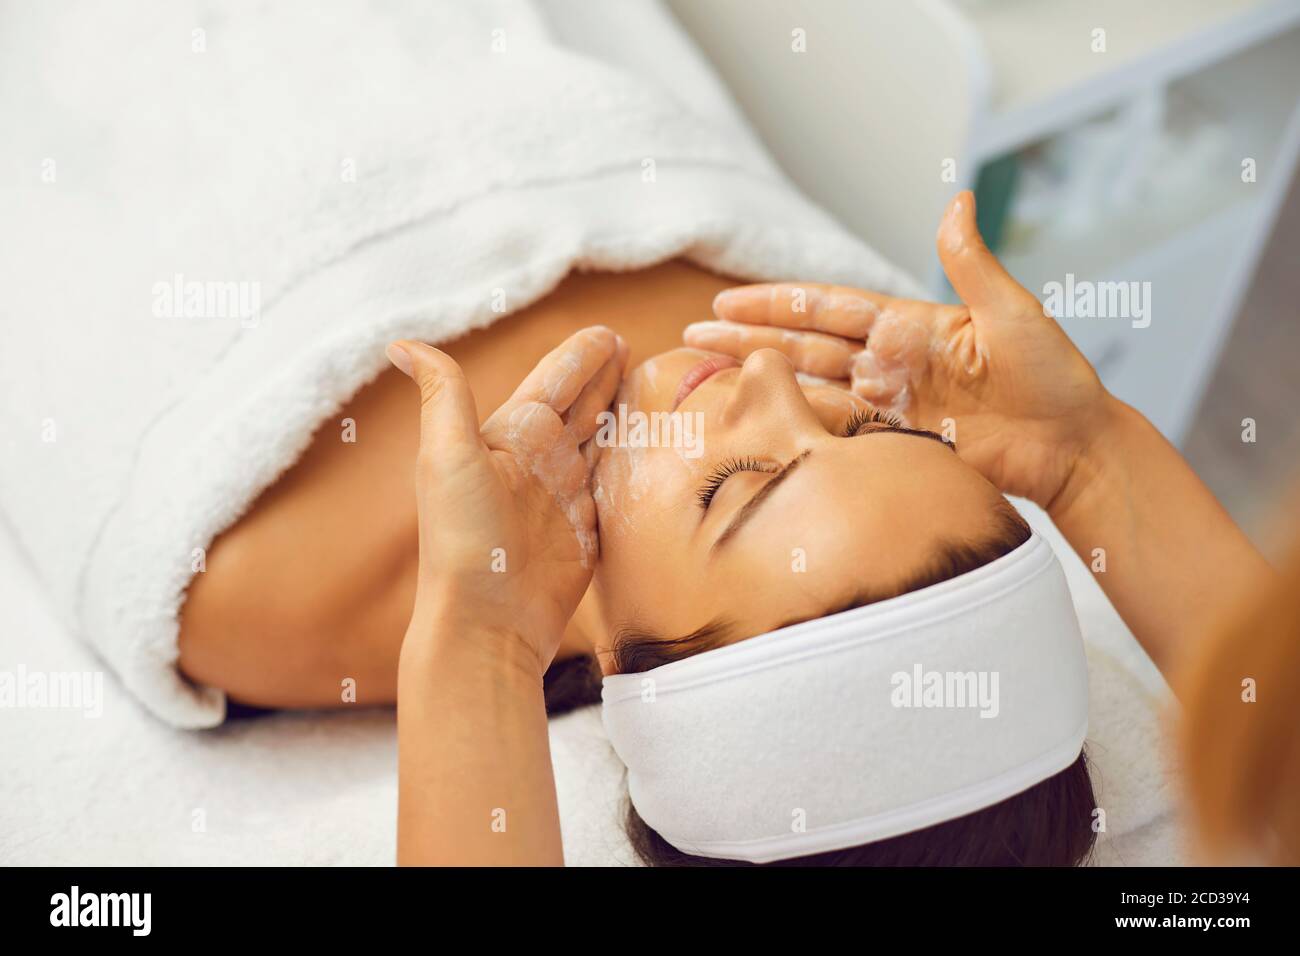 Woman beautician makes facial massage to woman patient in beauty salon Stock Photo